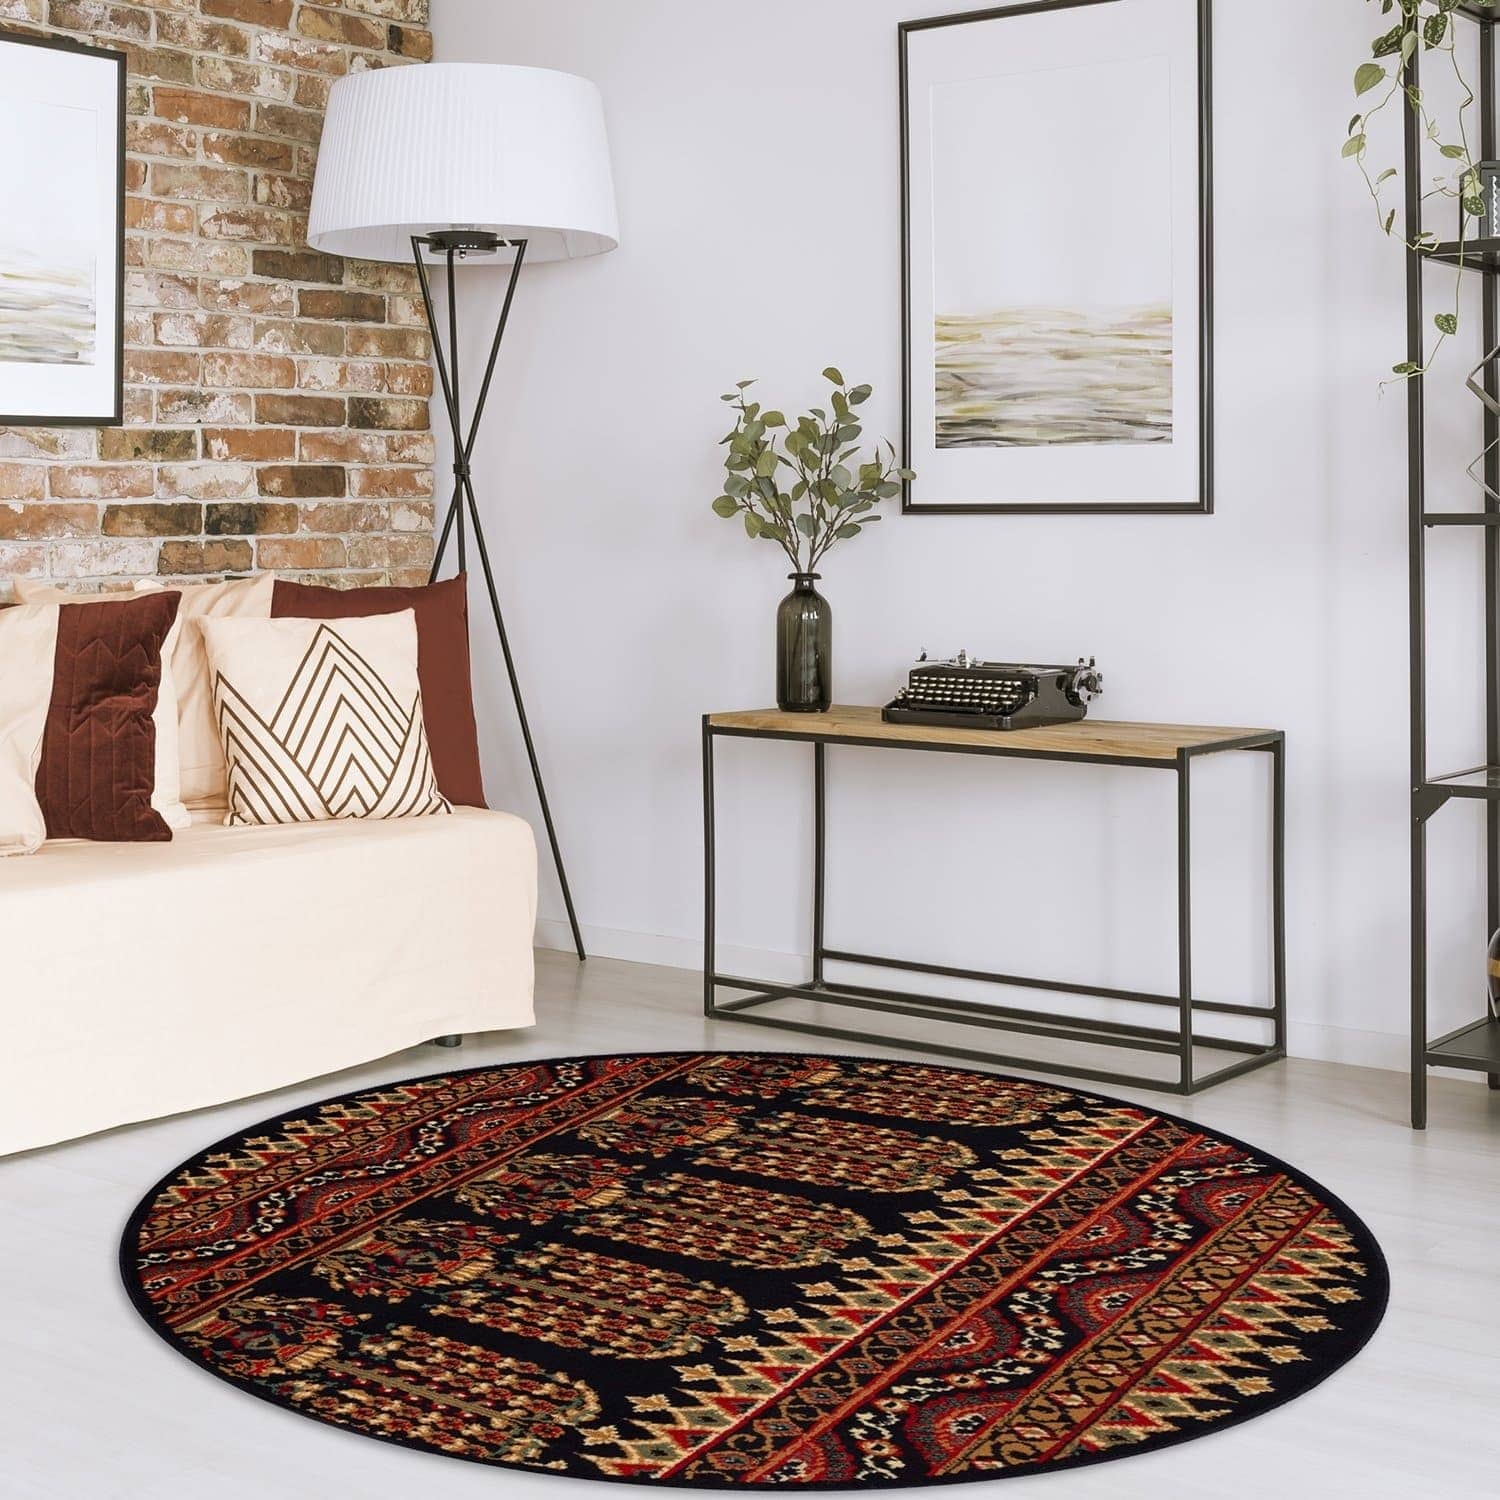 11 Reasons to Love Area Rugs